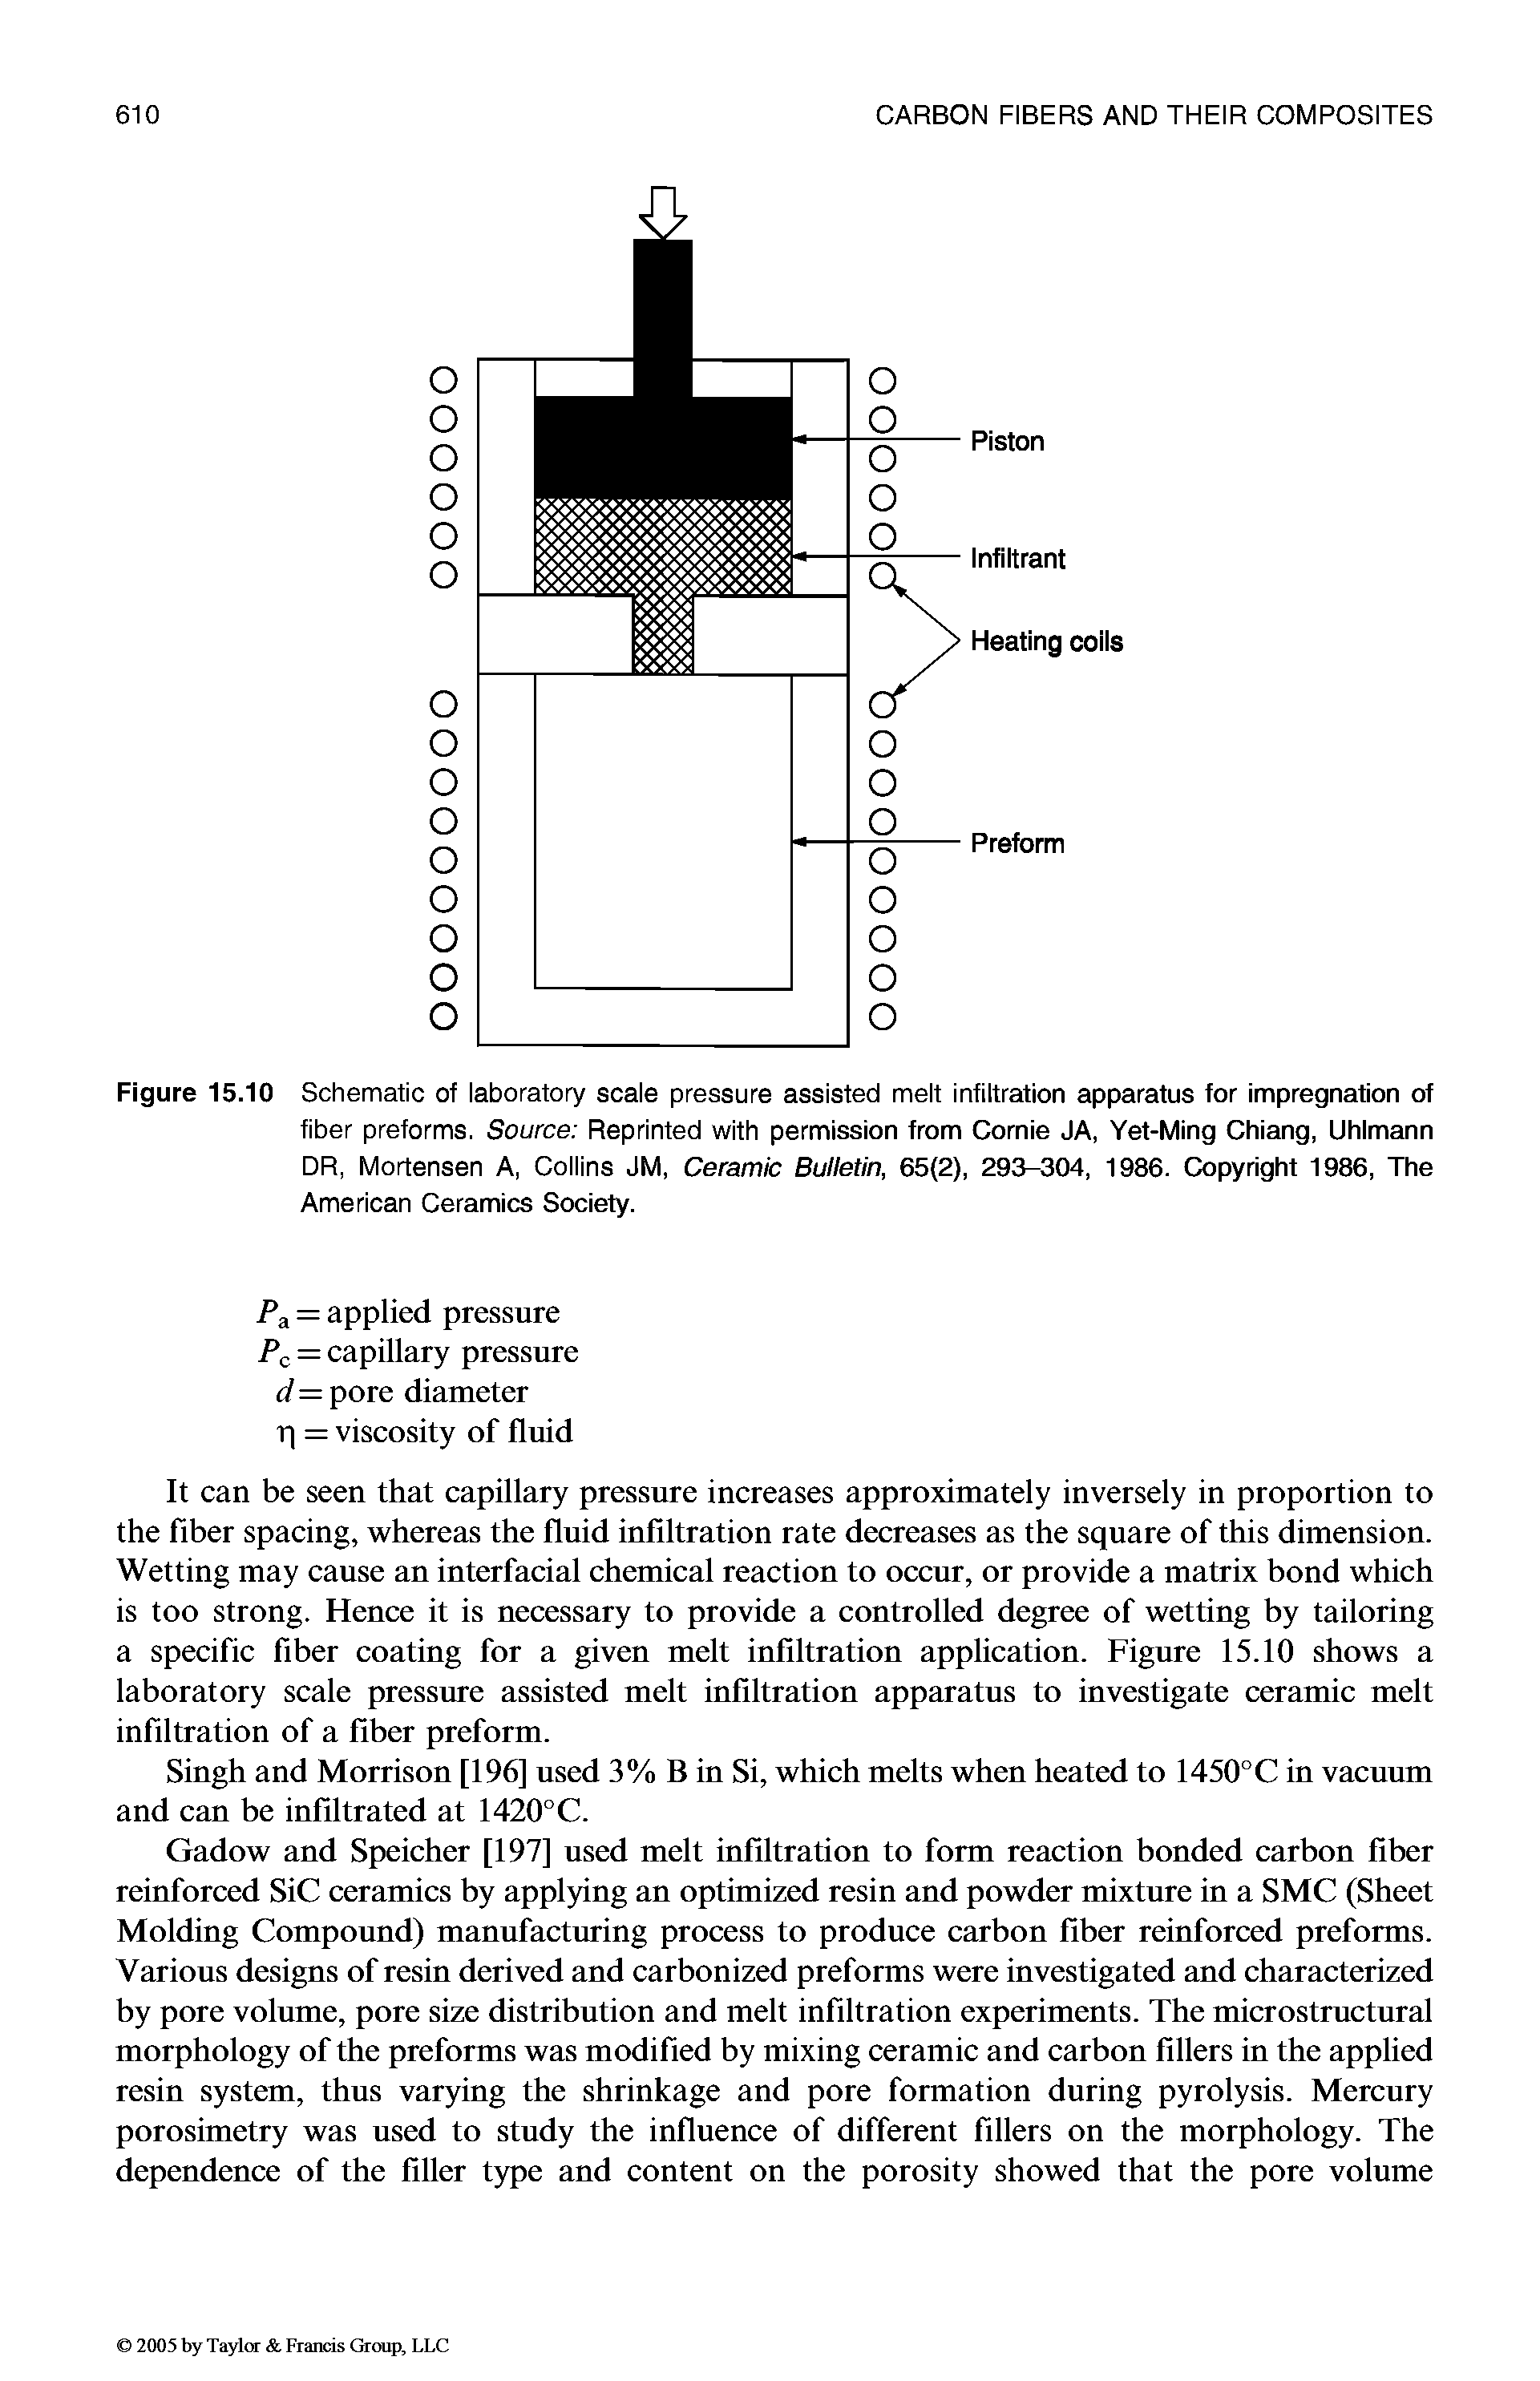 Figure 15.10 Schematic of laboratory scale pressure assisted melt infiltration apparatus for impregnation of fiber preforms. Source Reprinted with permission from Comie JA, Yet-Ming Chiang, Uhlmann DR, Mortensen A, Collins JM, Ceramic Bulletin, 65(2), 293-304, 1986. Copyright 1986, The American Ceramics Society.